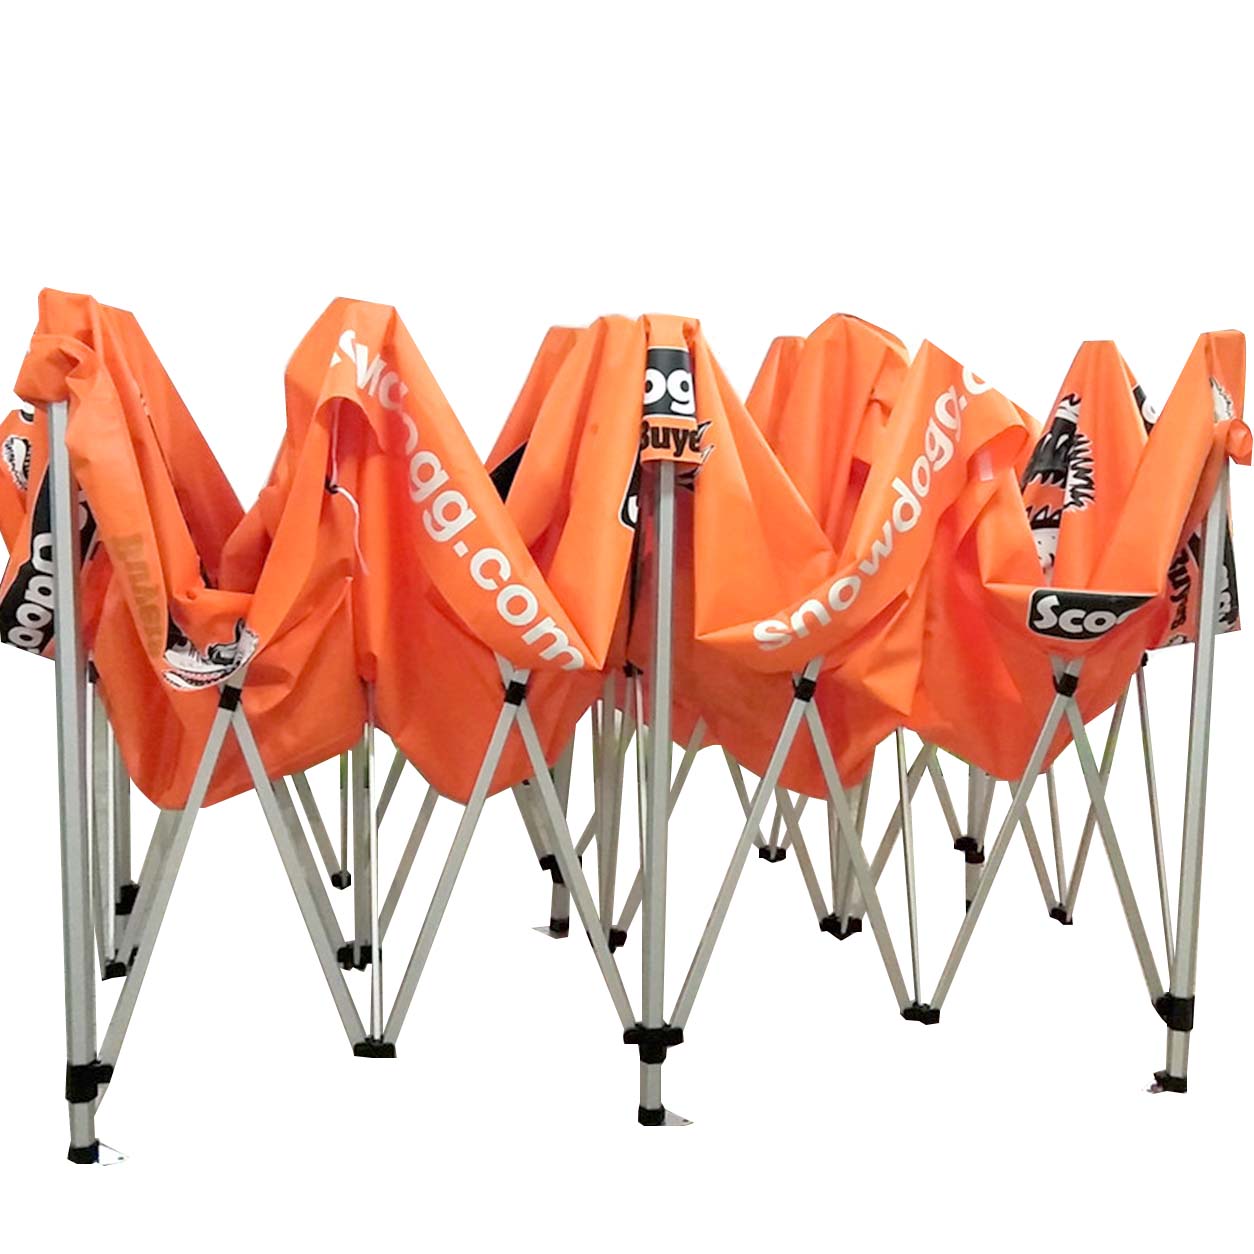 FeaMont folding lightweight pop up canopy certifications for sport events-2